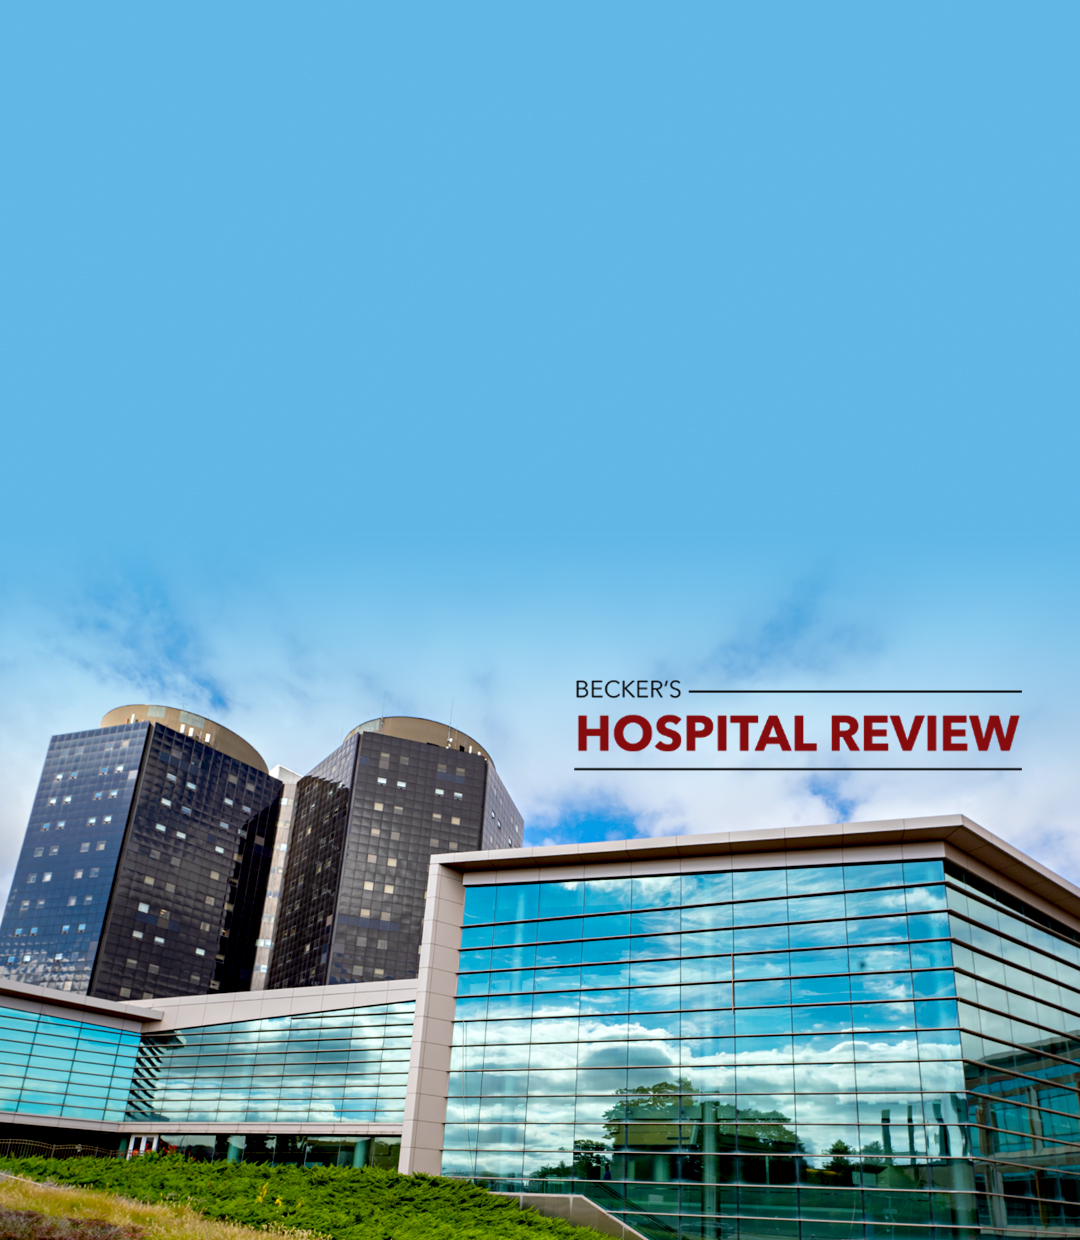 NAMED TO GREAT HOSPITALS IN AMERICA LIST